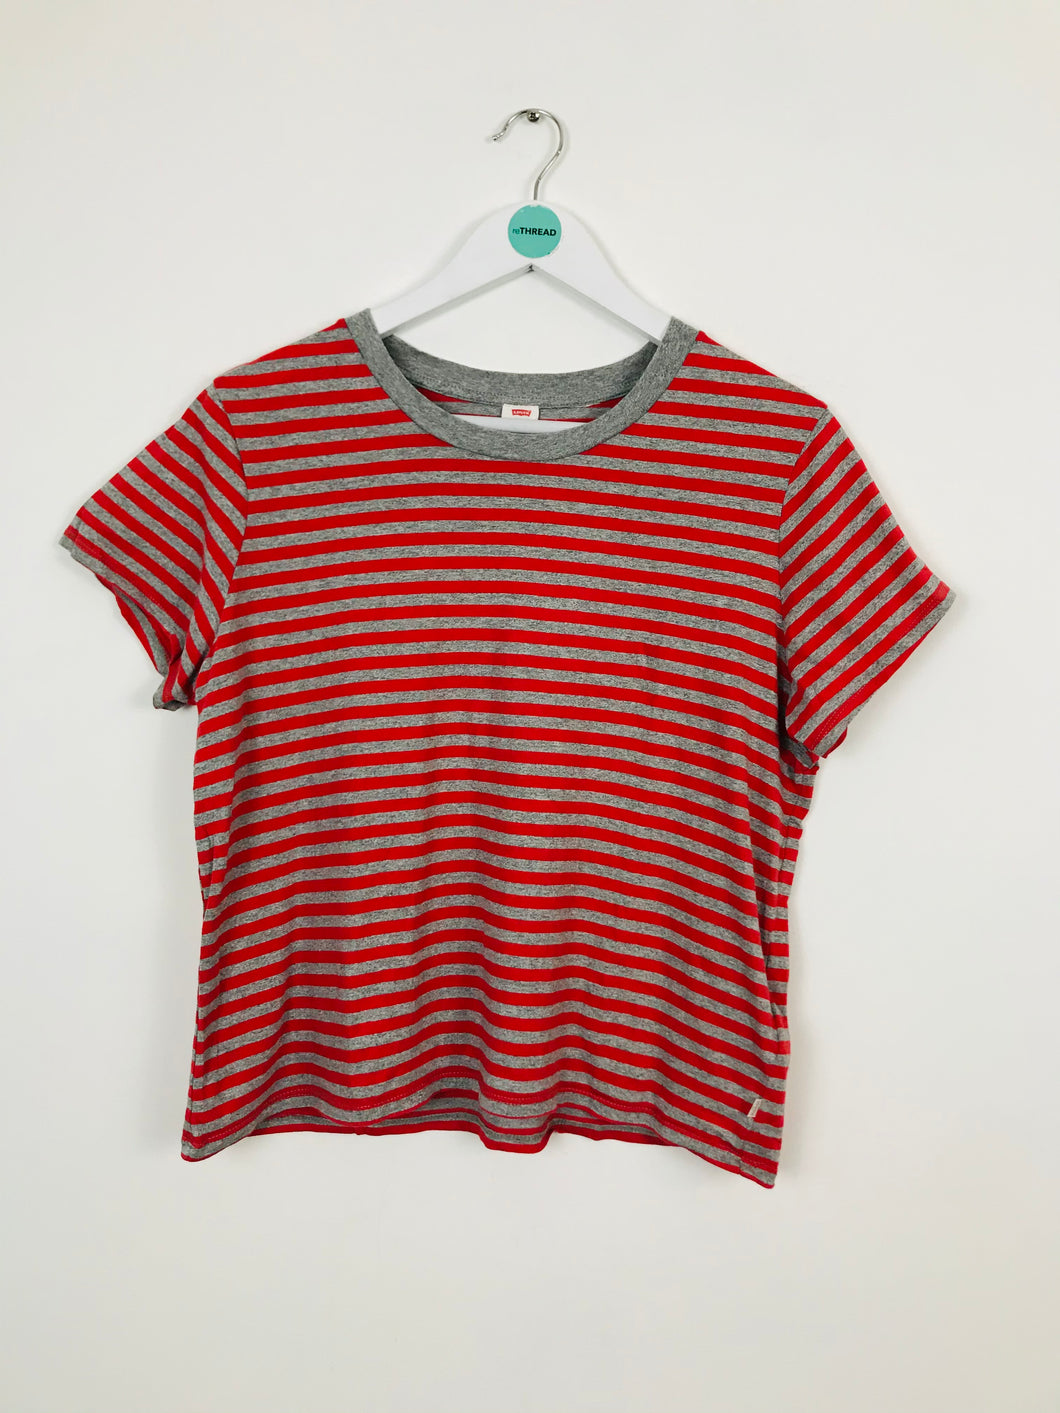 Levi’s Womens Stripe T-shirt | UK10 | Red and grey